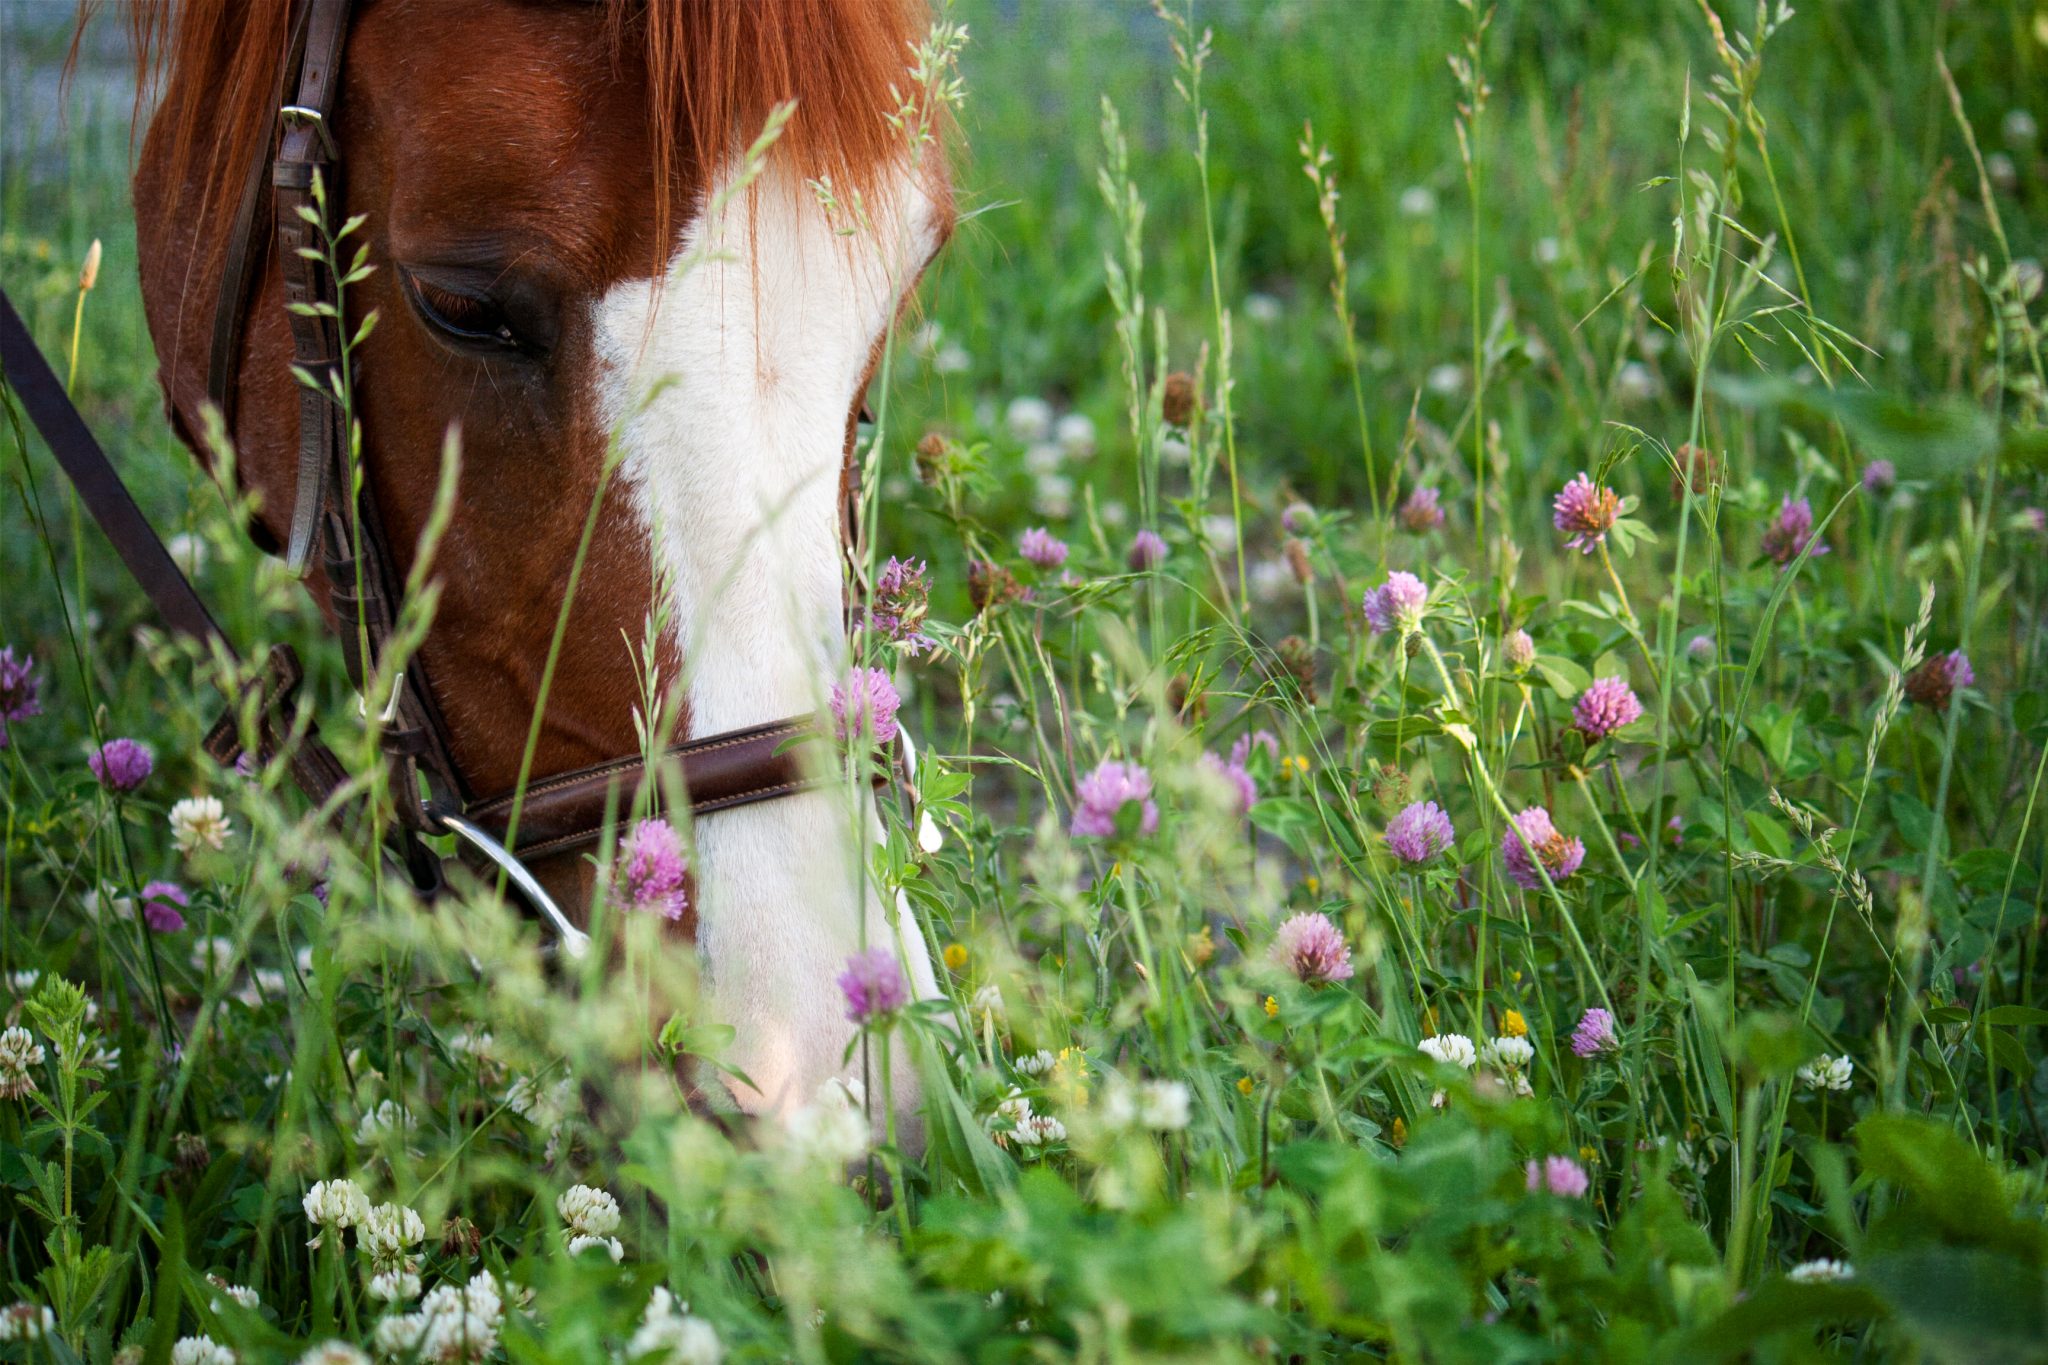 Horse grazing cover crops.